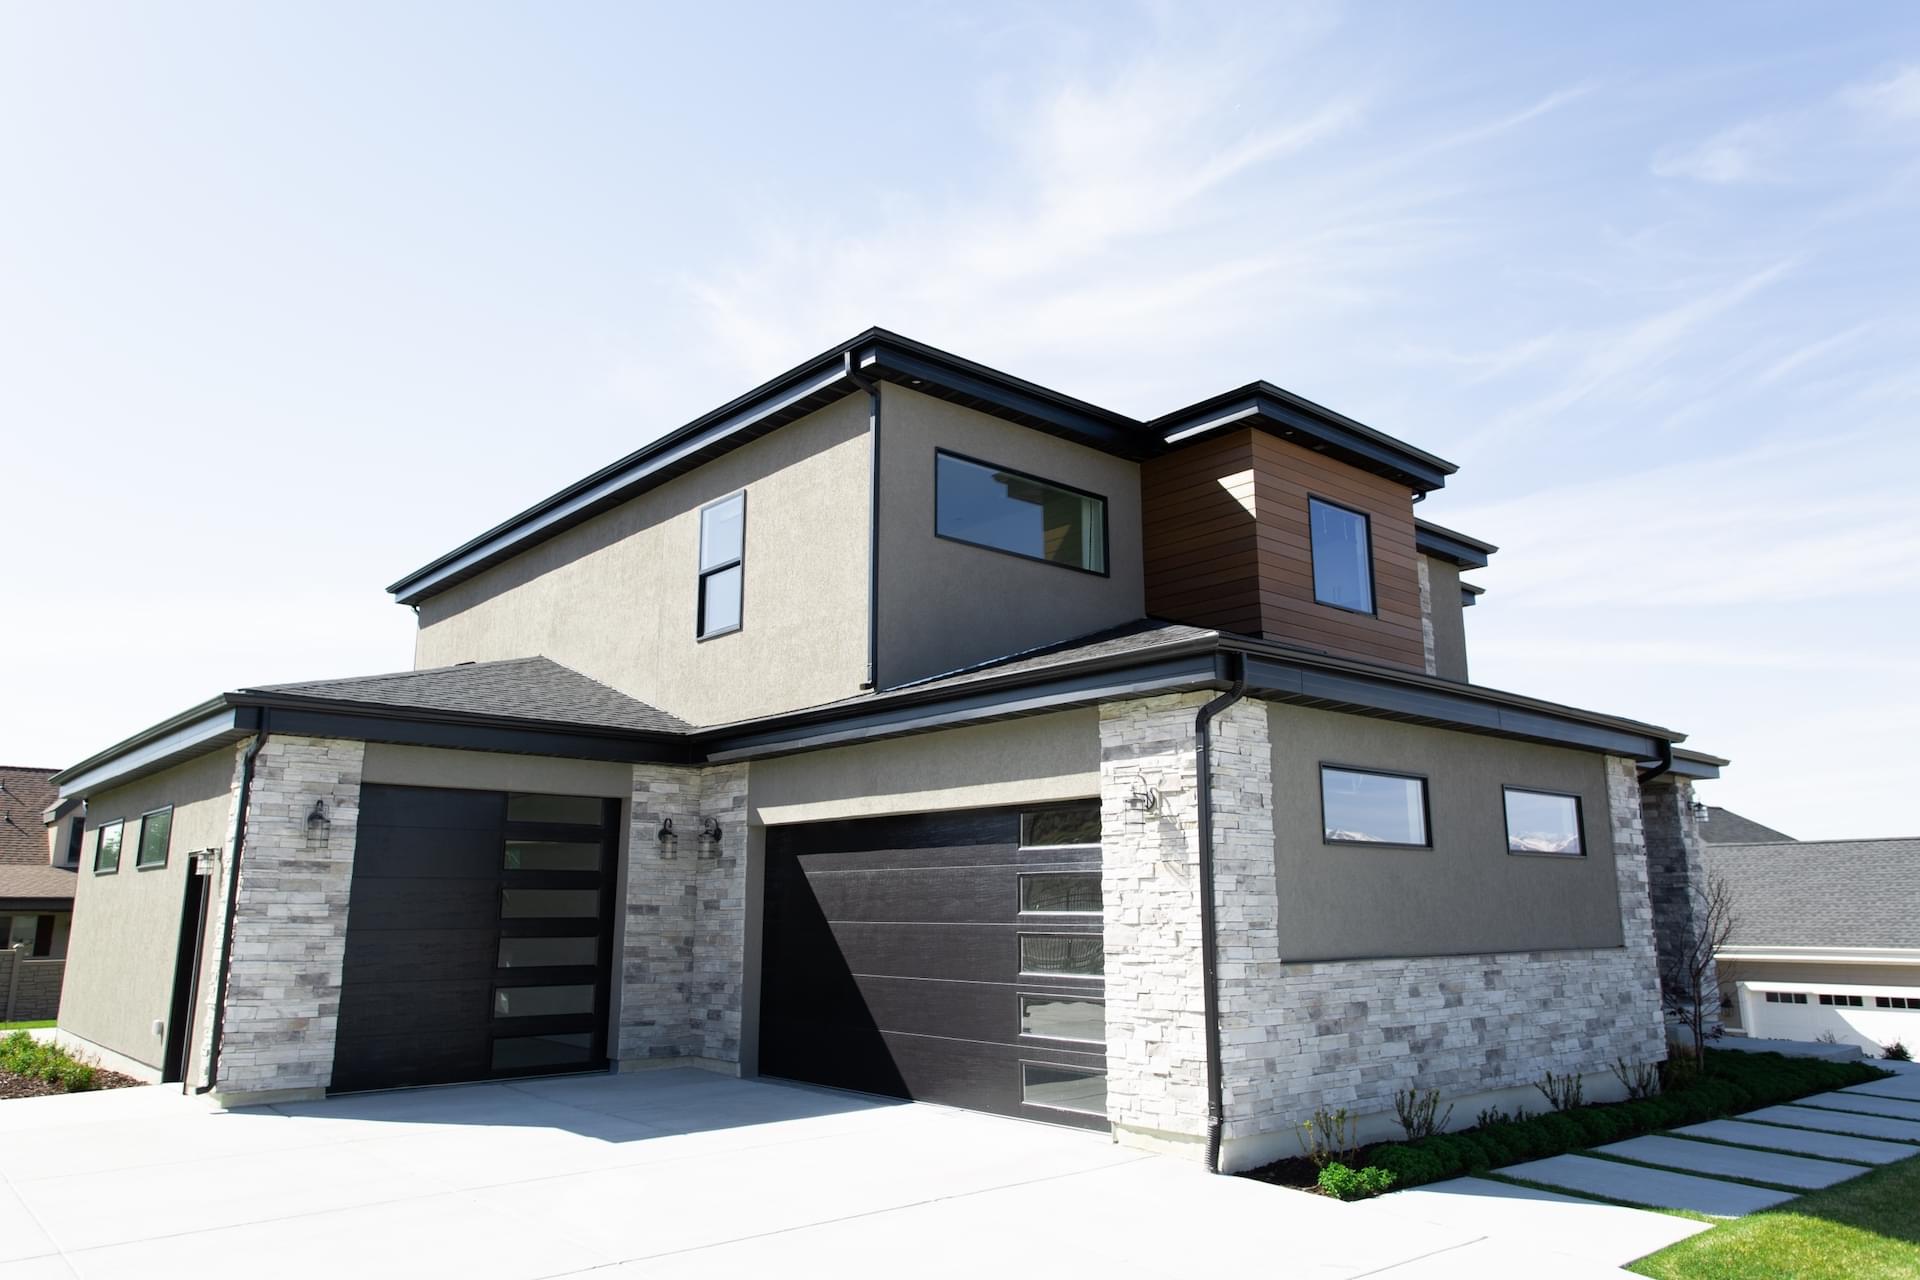 New Home Exteriors Photos of Fieldstone Homes